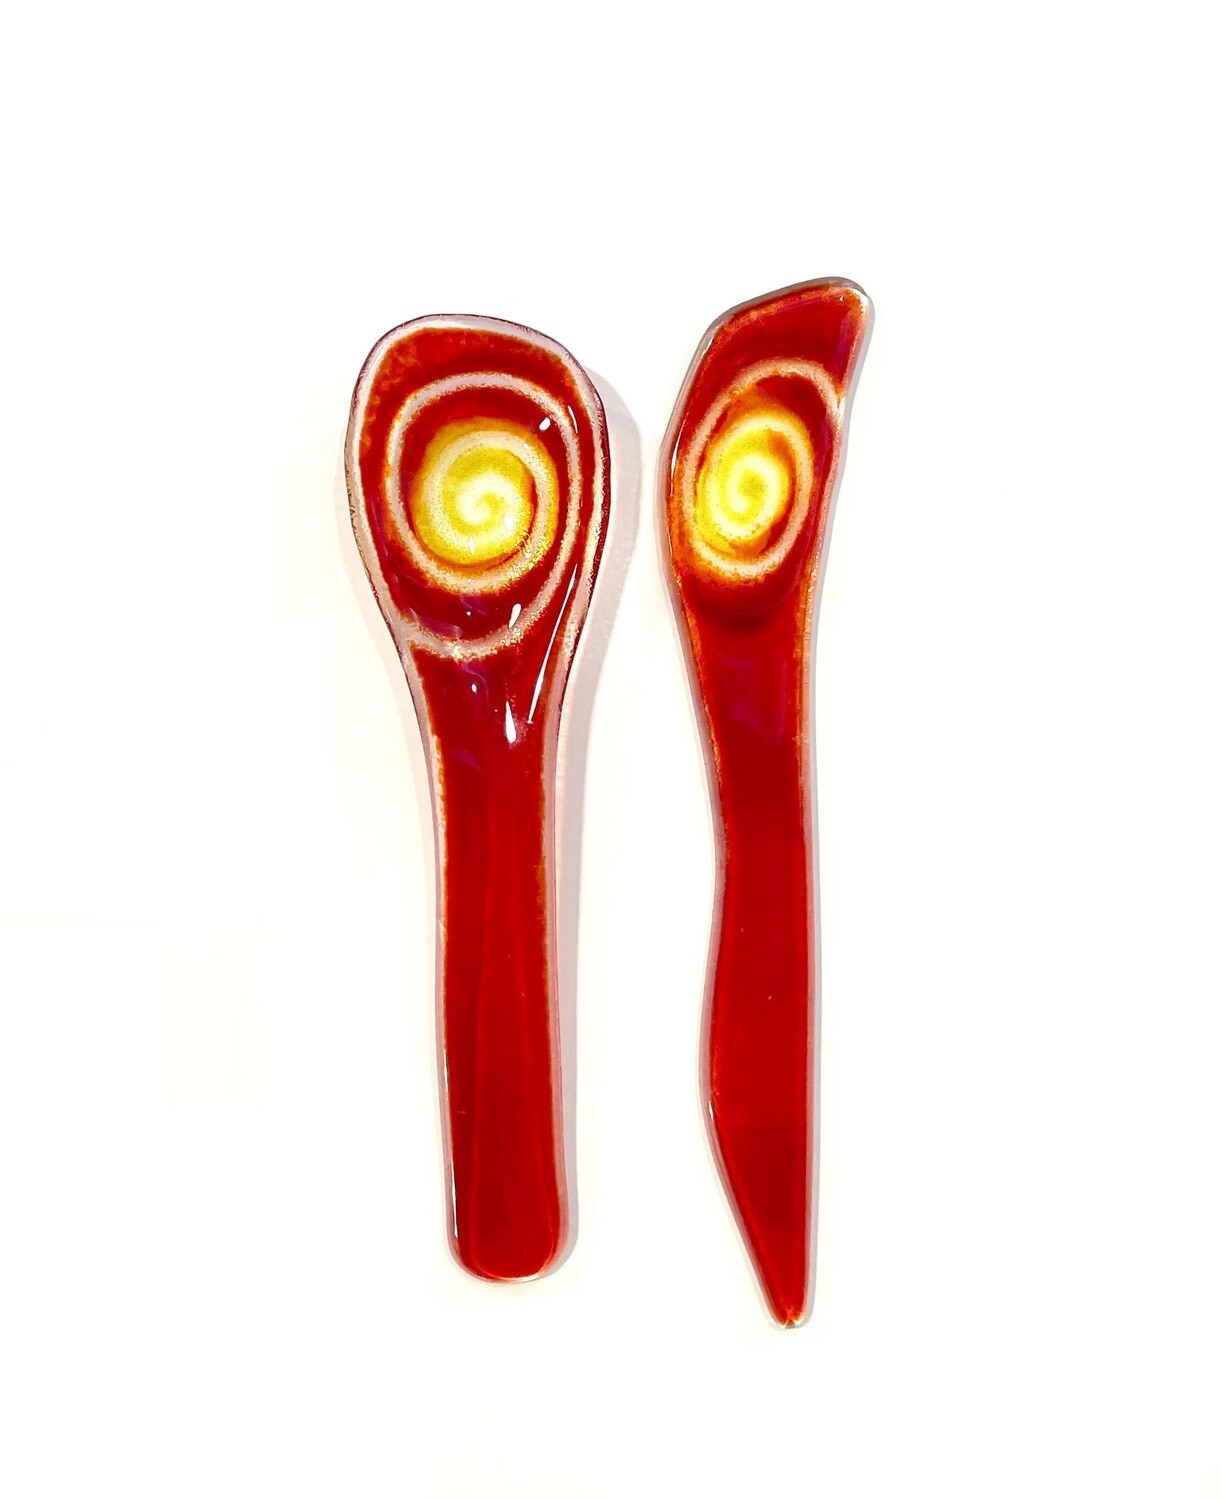 Red Spiral Glass Spoon and Knife Set- Kiln Art